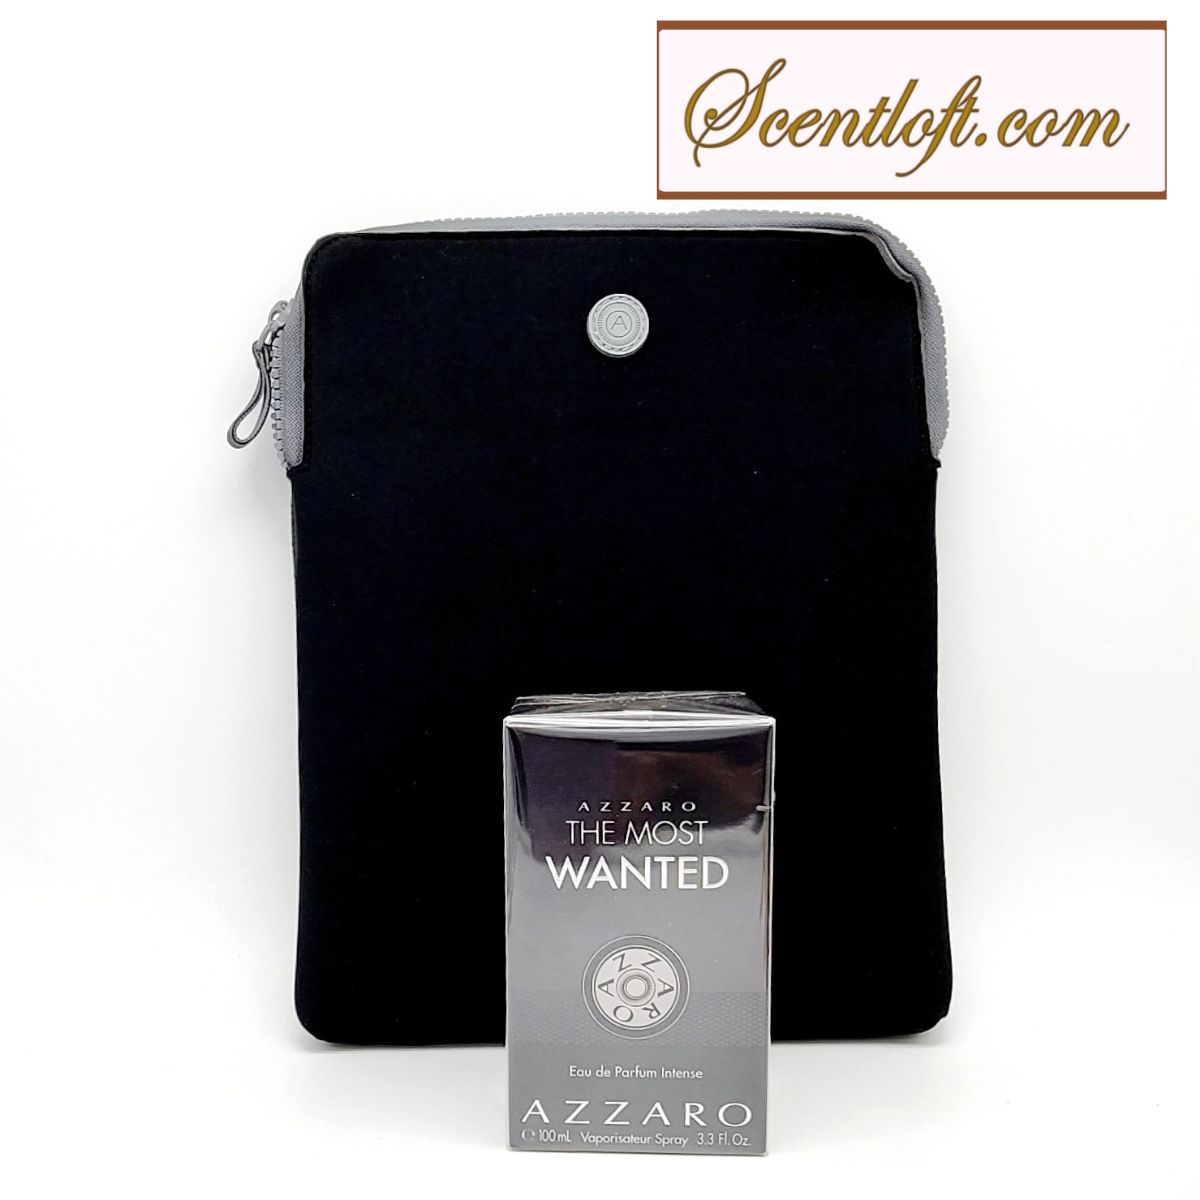 AZZARO The Most Wanted EDP Intense 100ml + Free Azzaro Tablet Pouch *